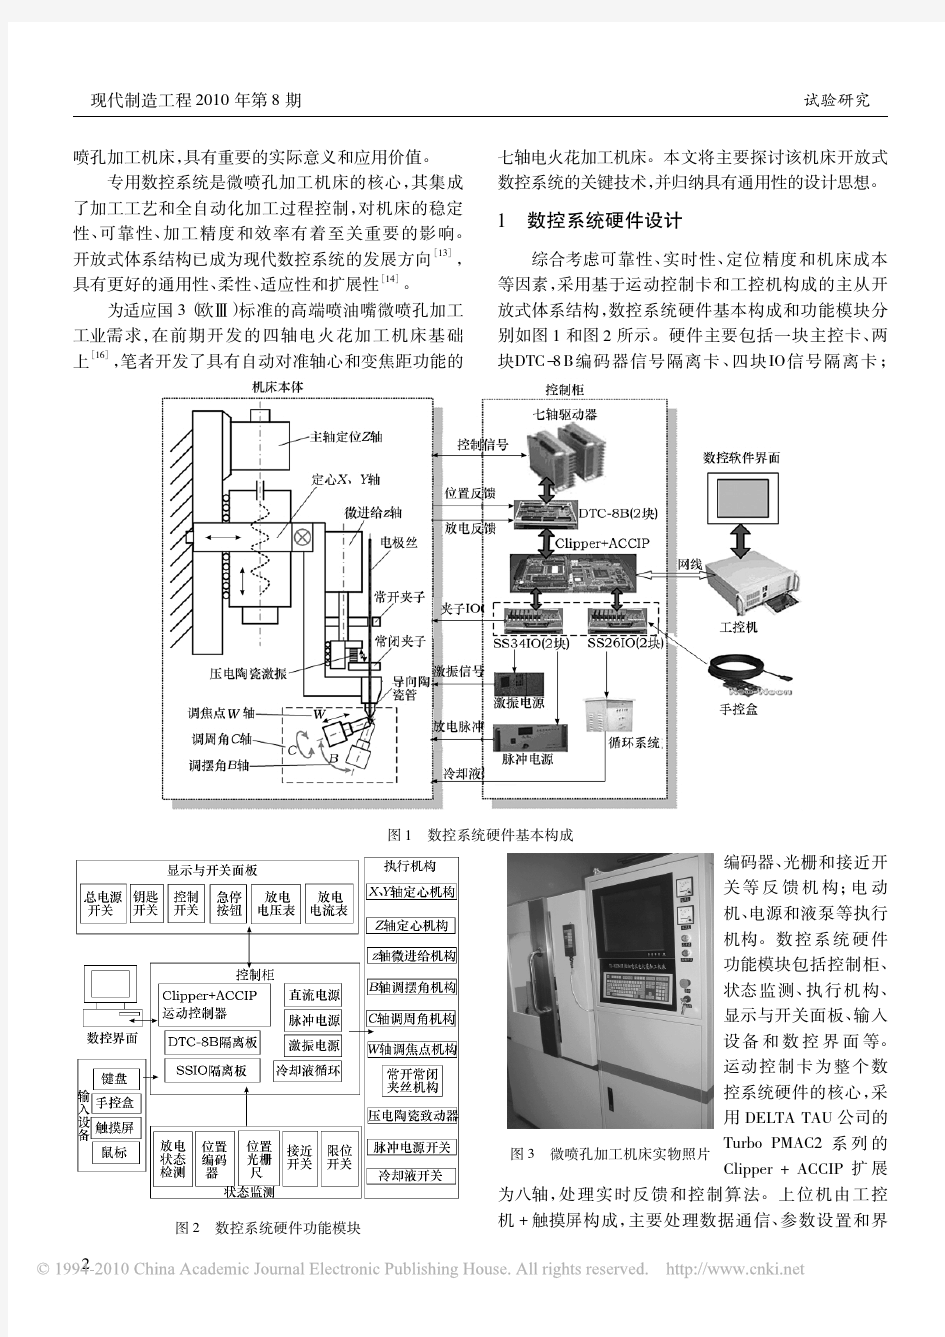 Development of CNC system of 7-axis EDM machine tool for drilling micro nozzles